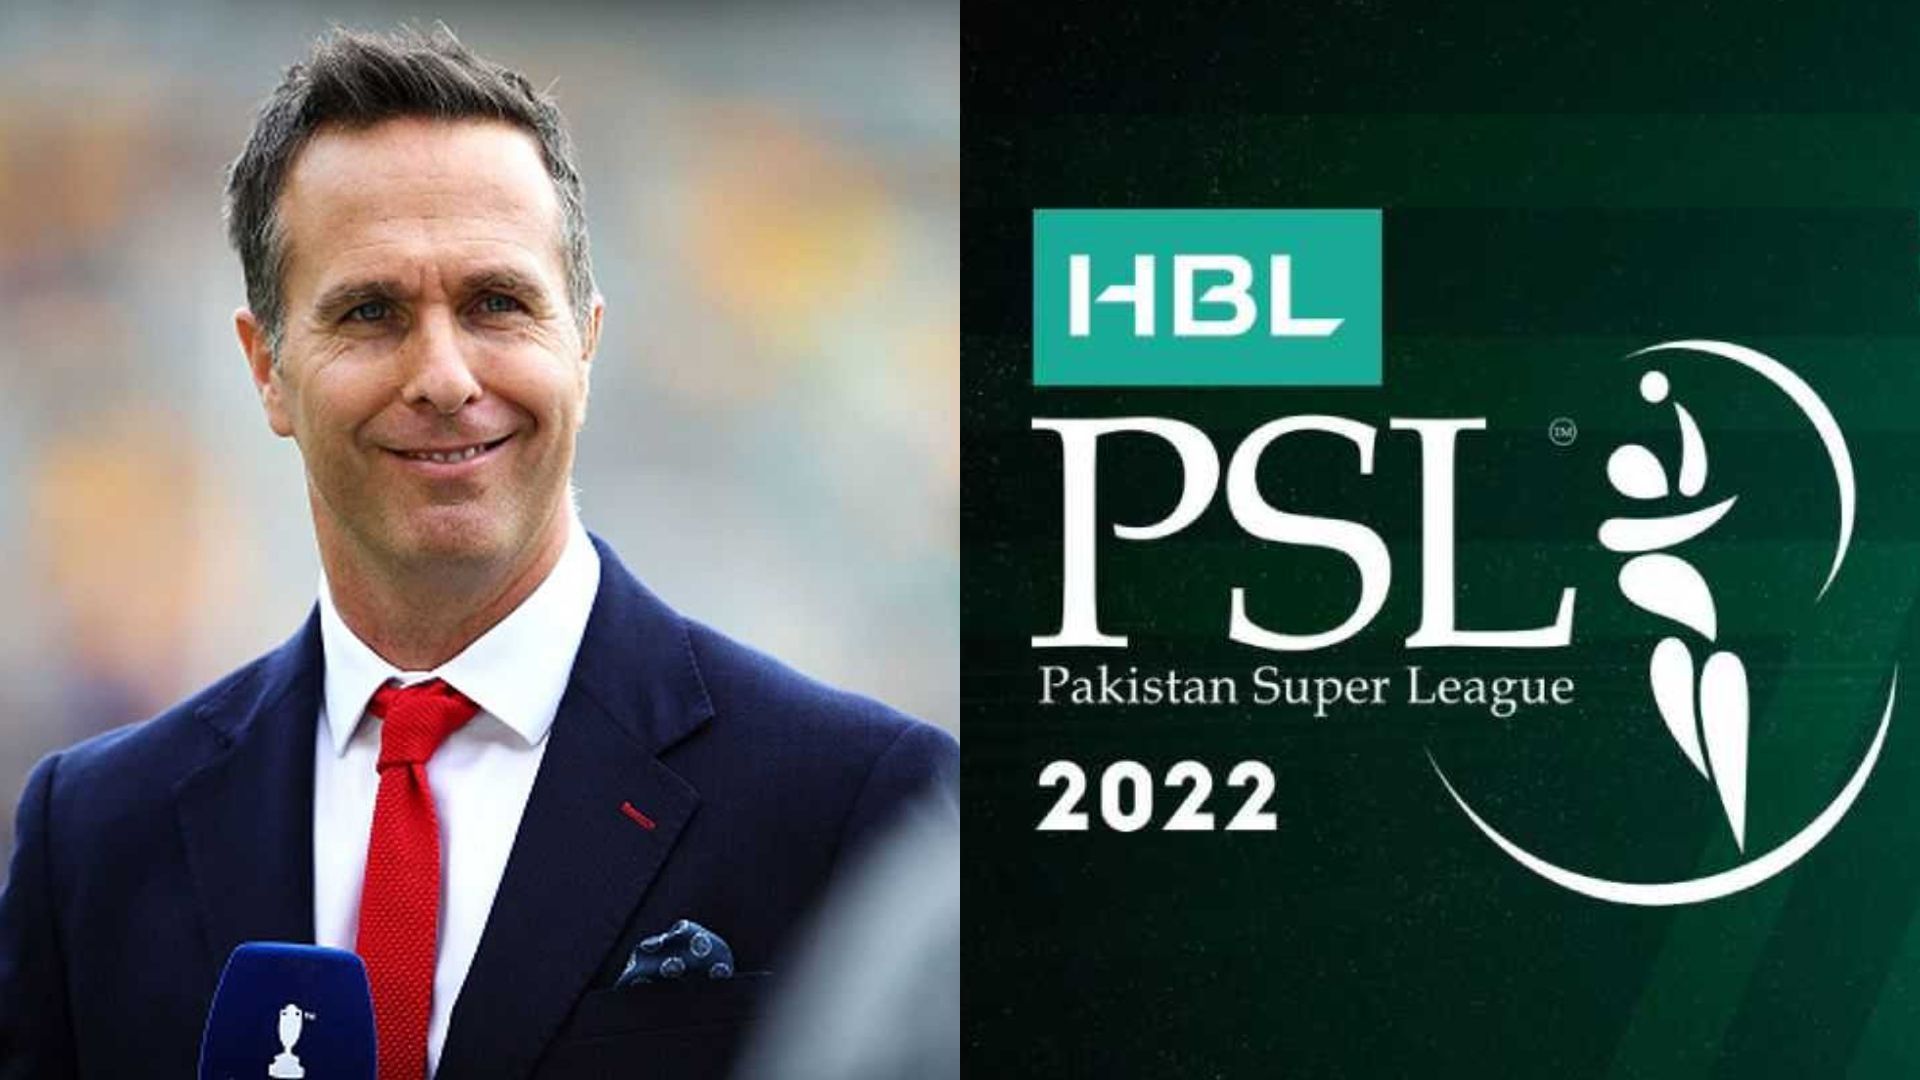 Former England skipper Michael Vaughan feels that the Pakistan Super League is the second best T20 league in the world